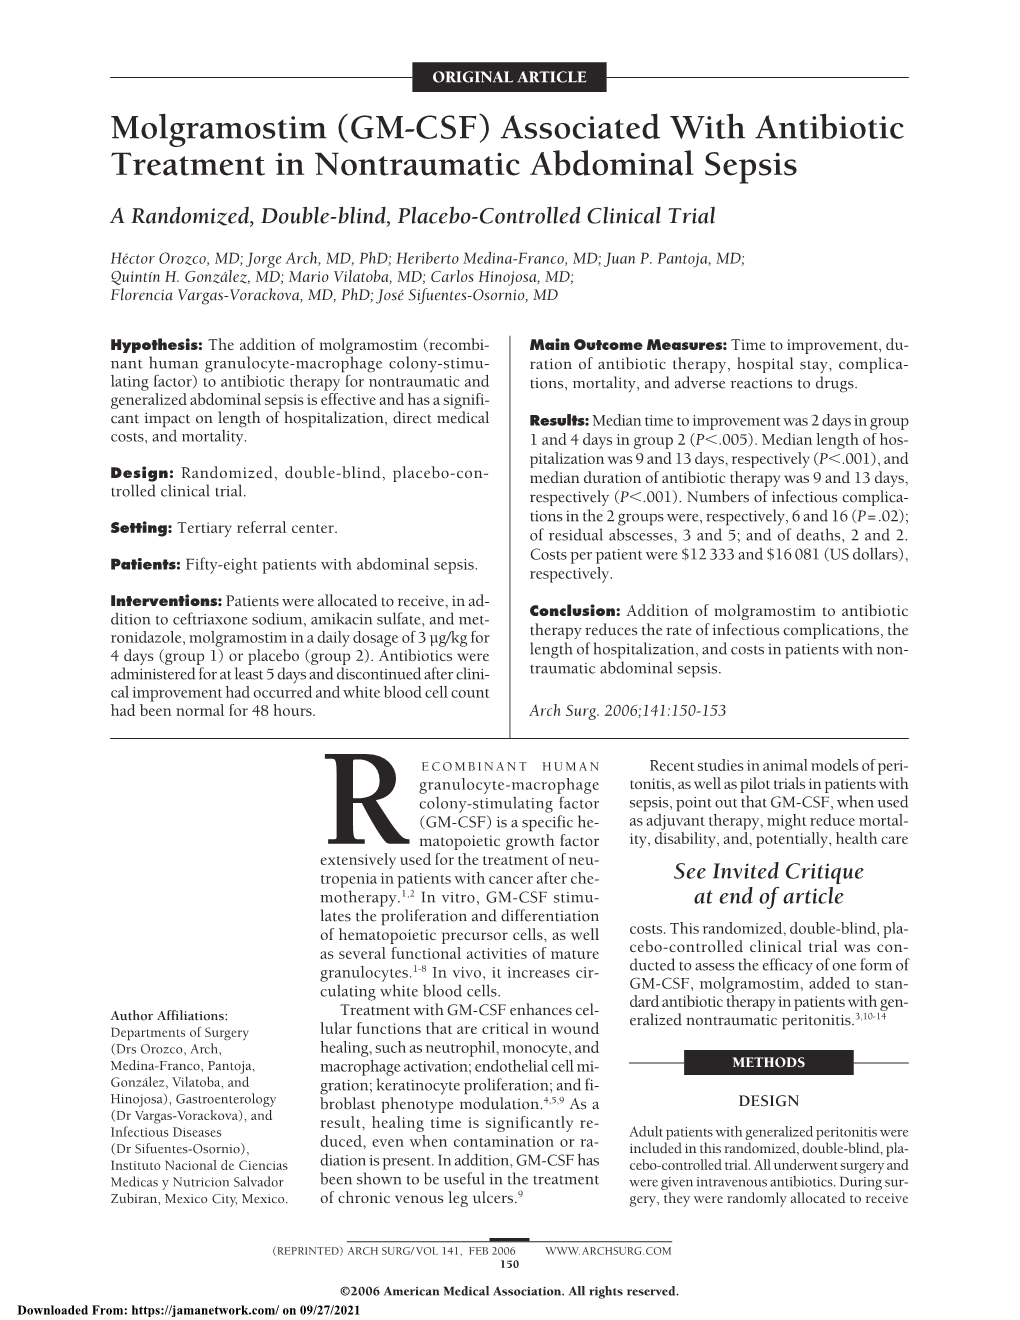 Molgramostim (GM-CSF) Associated with Antibiotic Treatment in Nontraumatic Abdominal Sepsis a Randomized, Double-Blind, Placebo-Controlled Clinical Trial